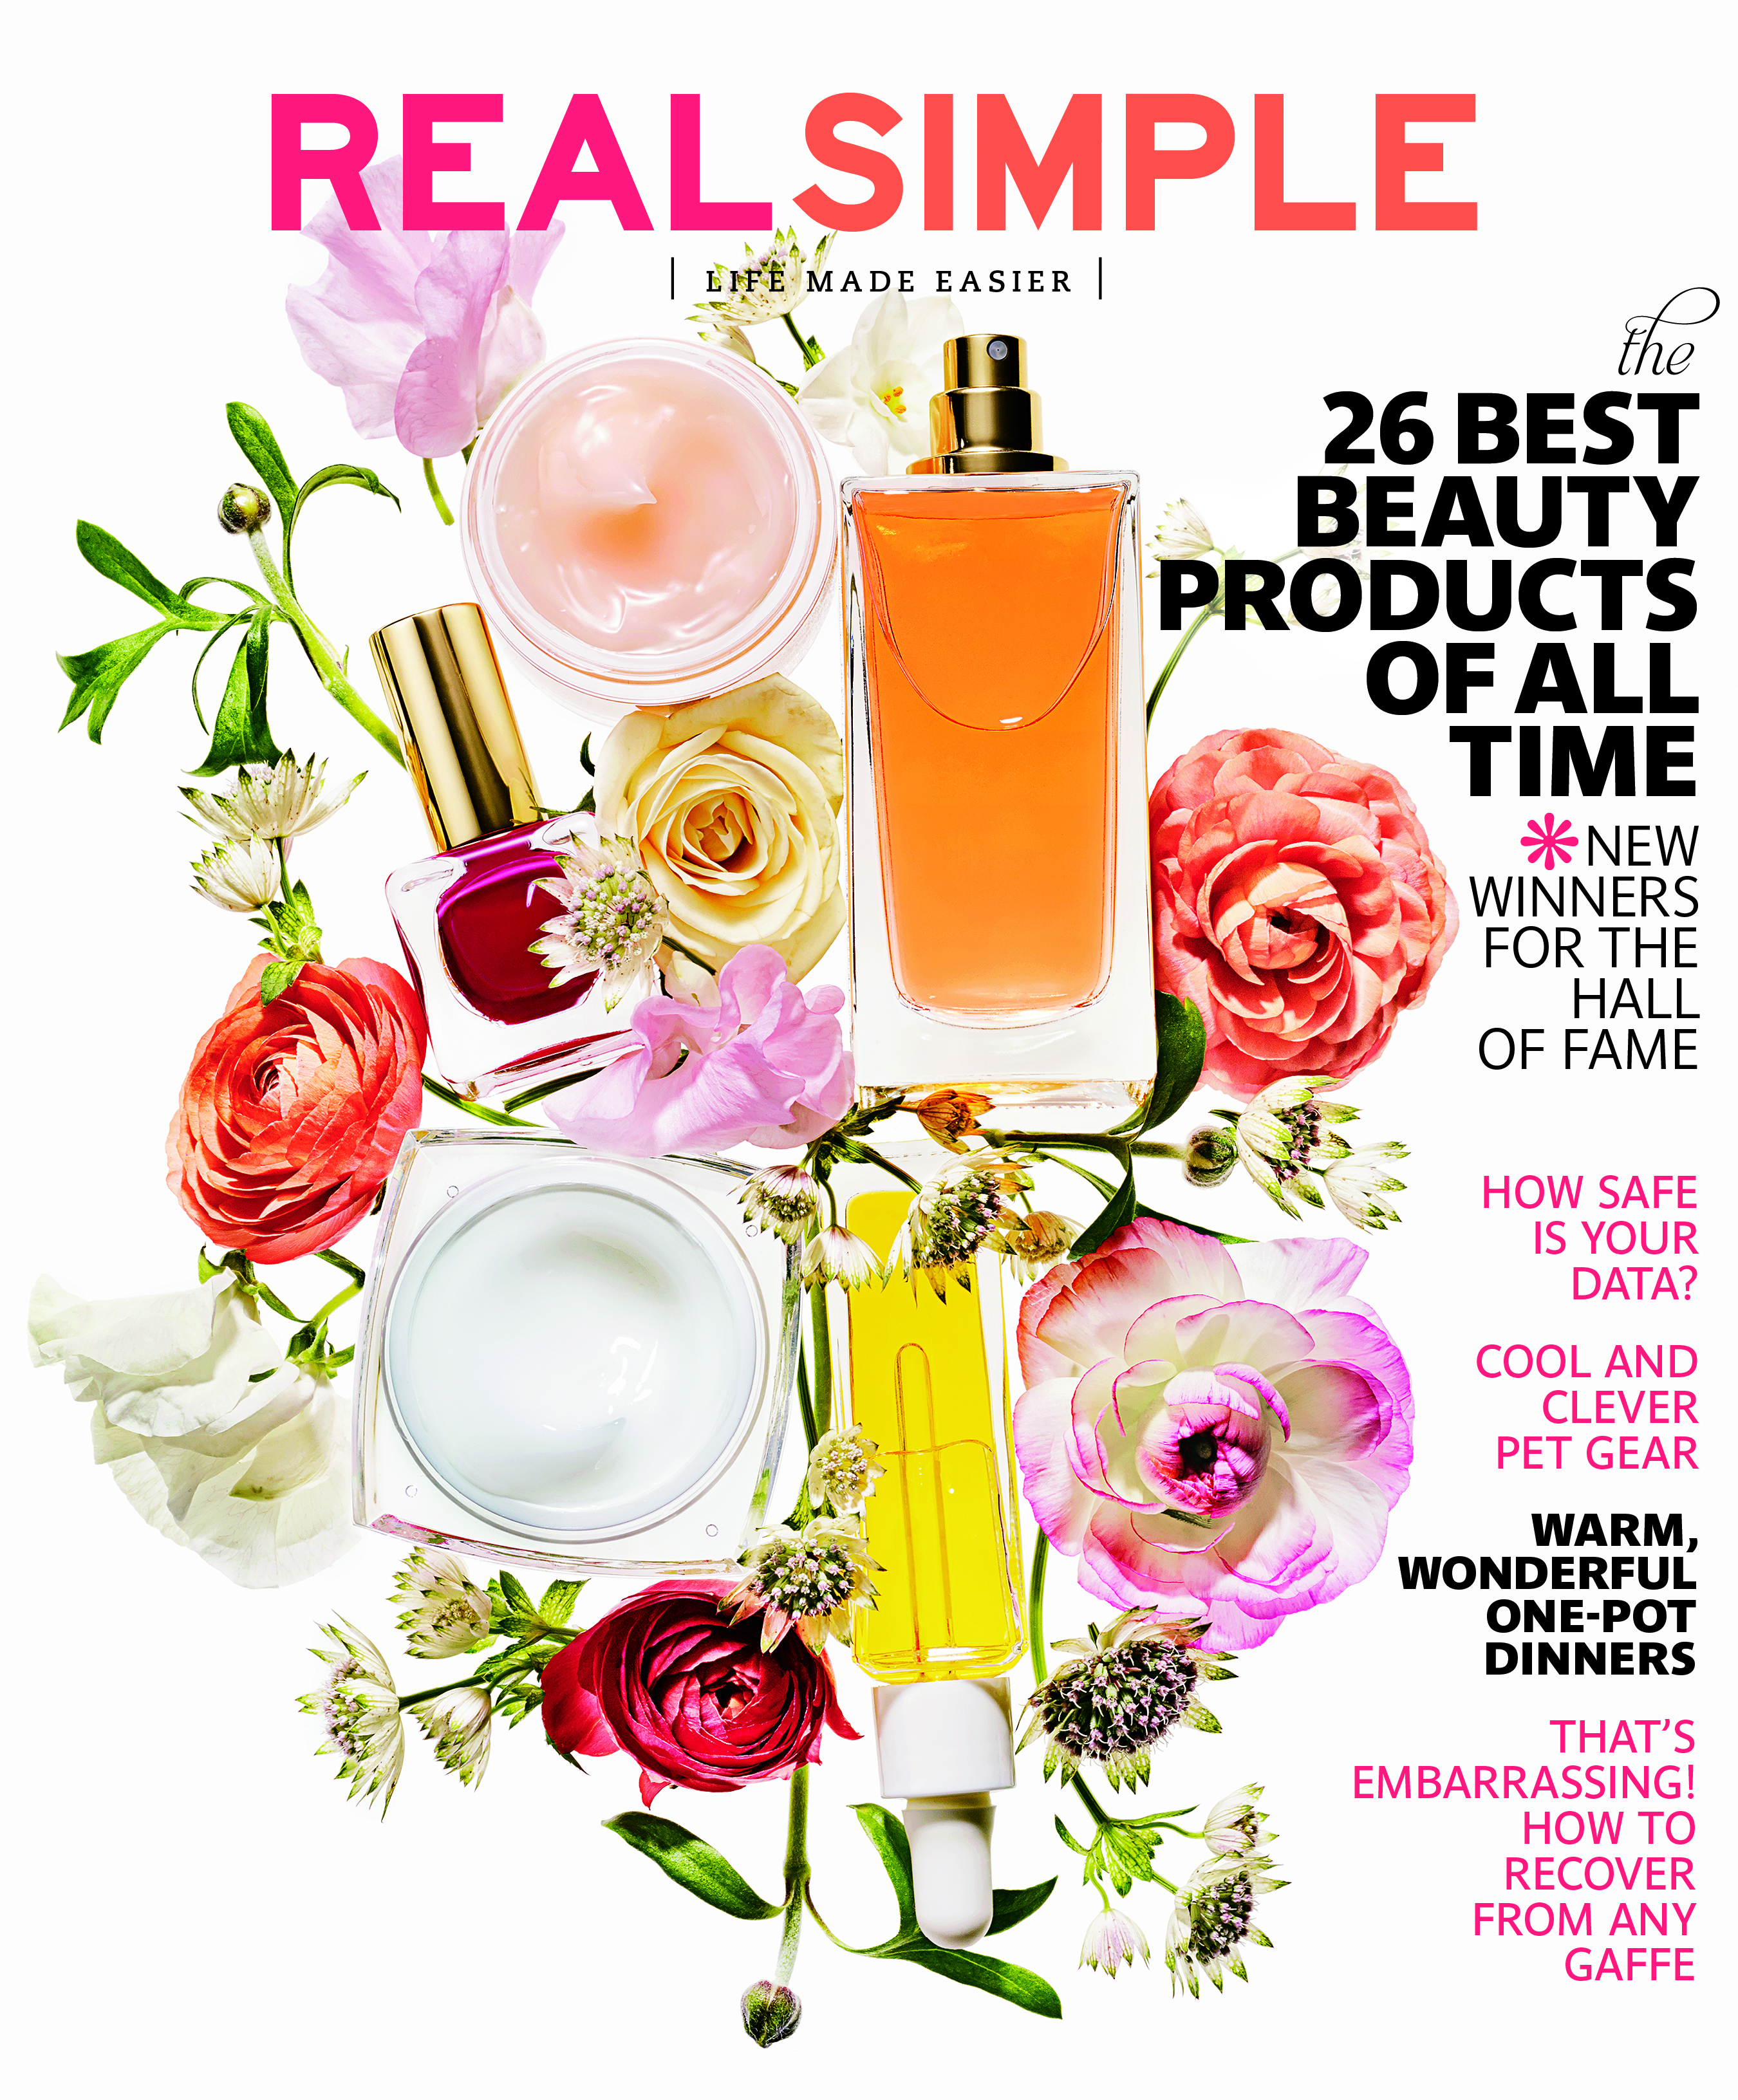 Real Simple-March 2014, "26 Best Beauty Products of All Time"